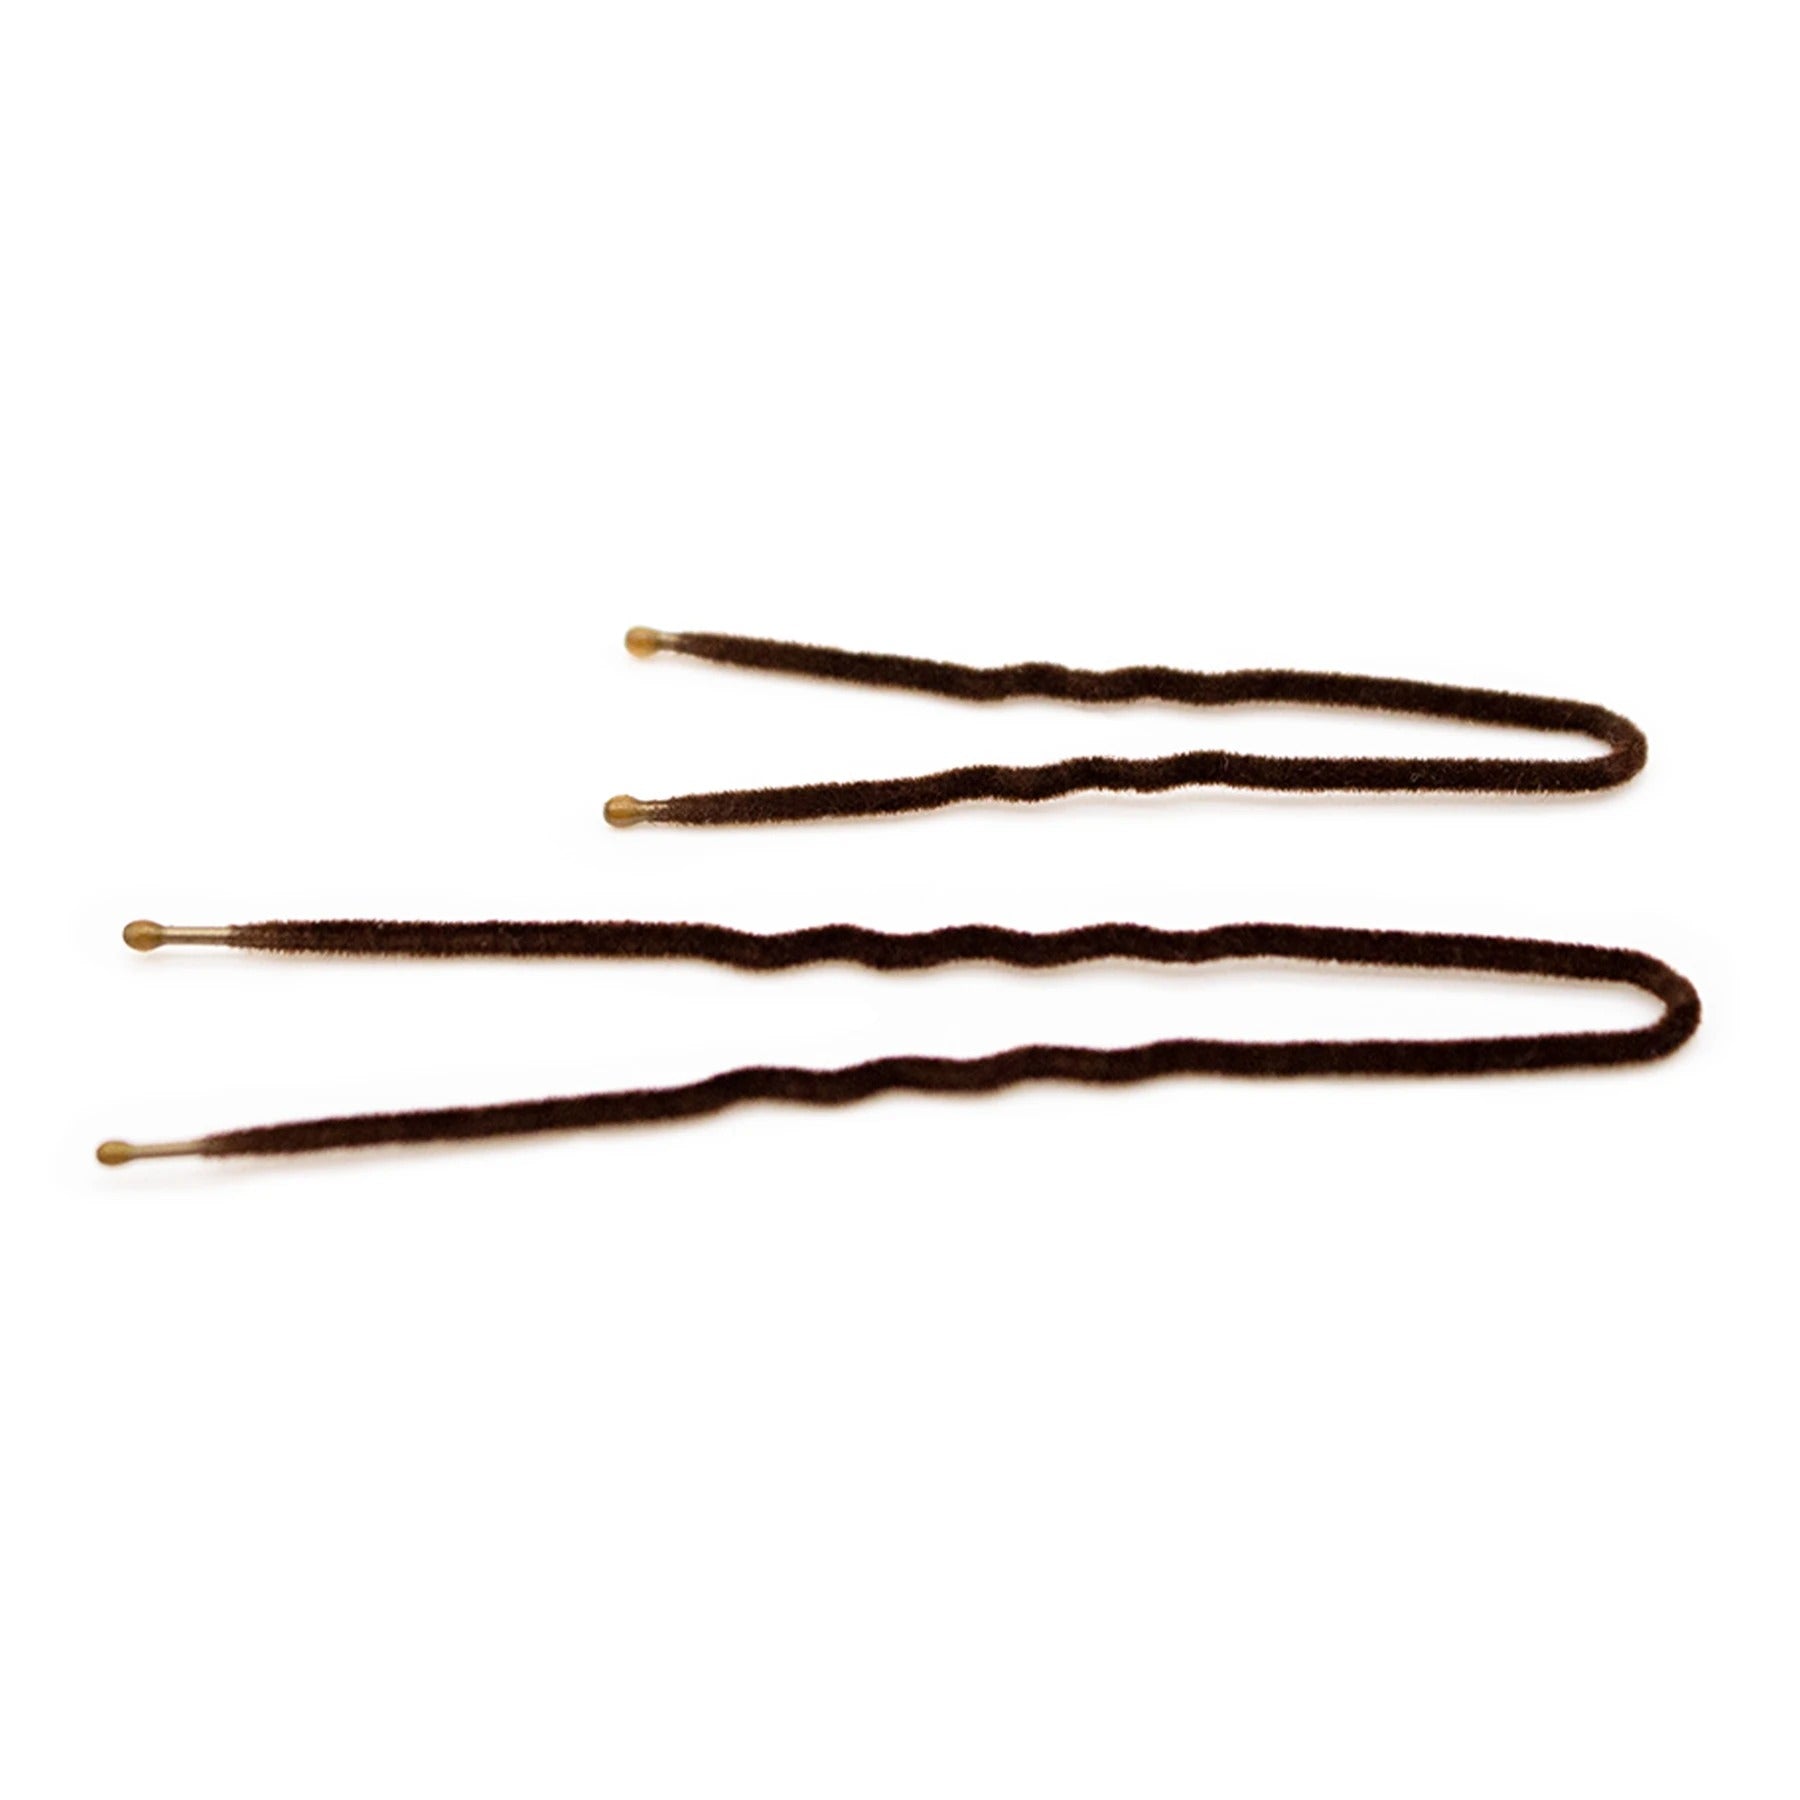 Frenchies Hairpin Brown